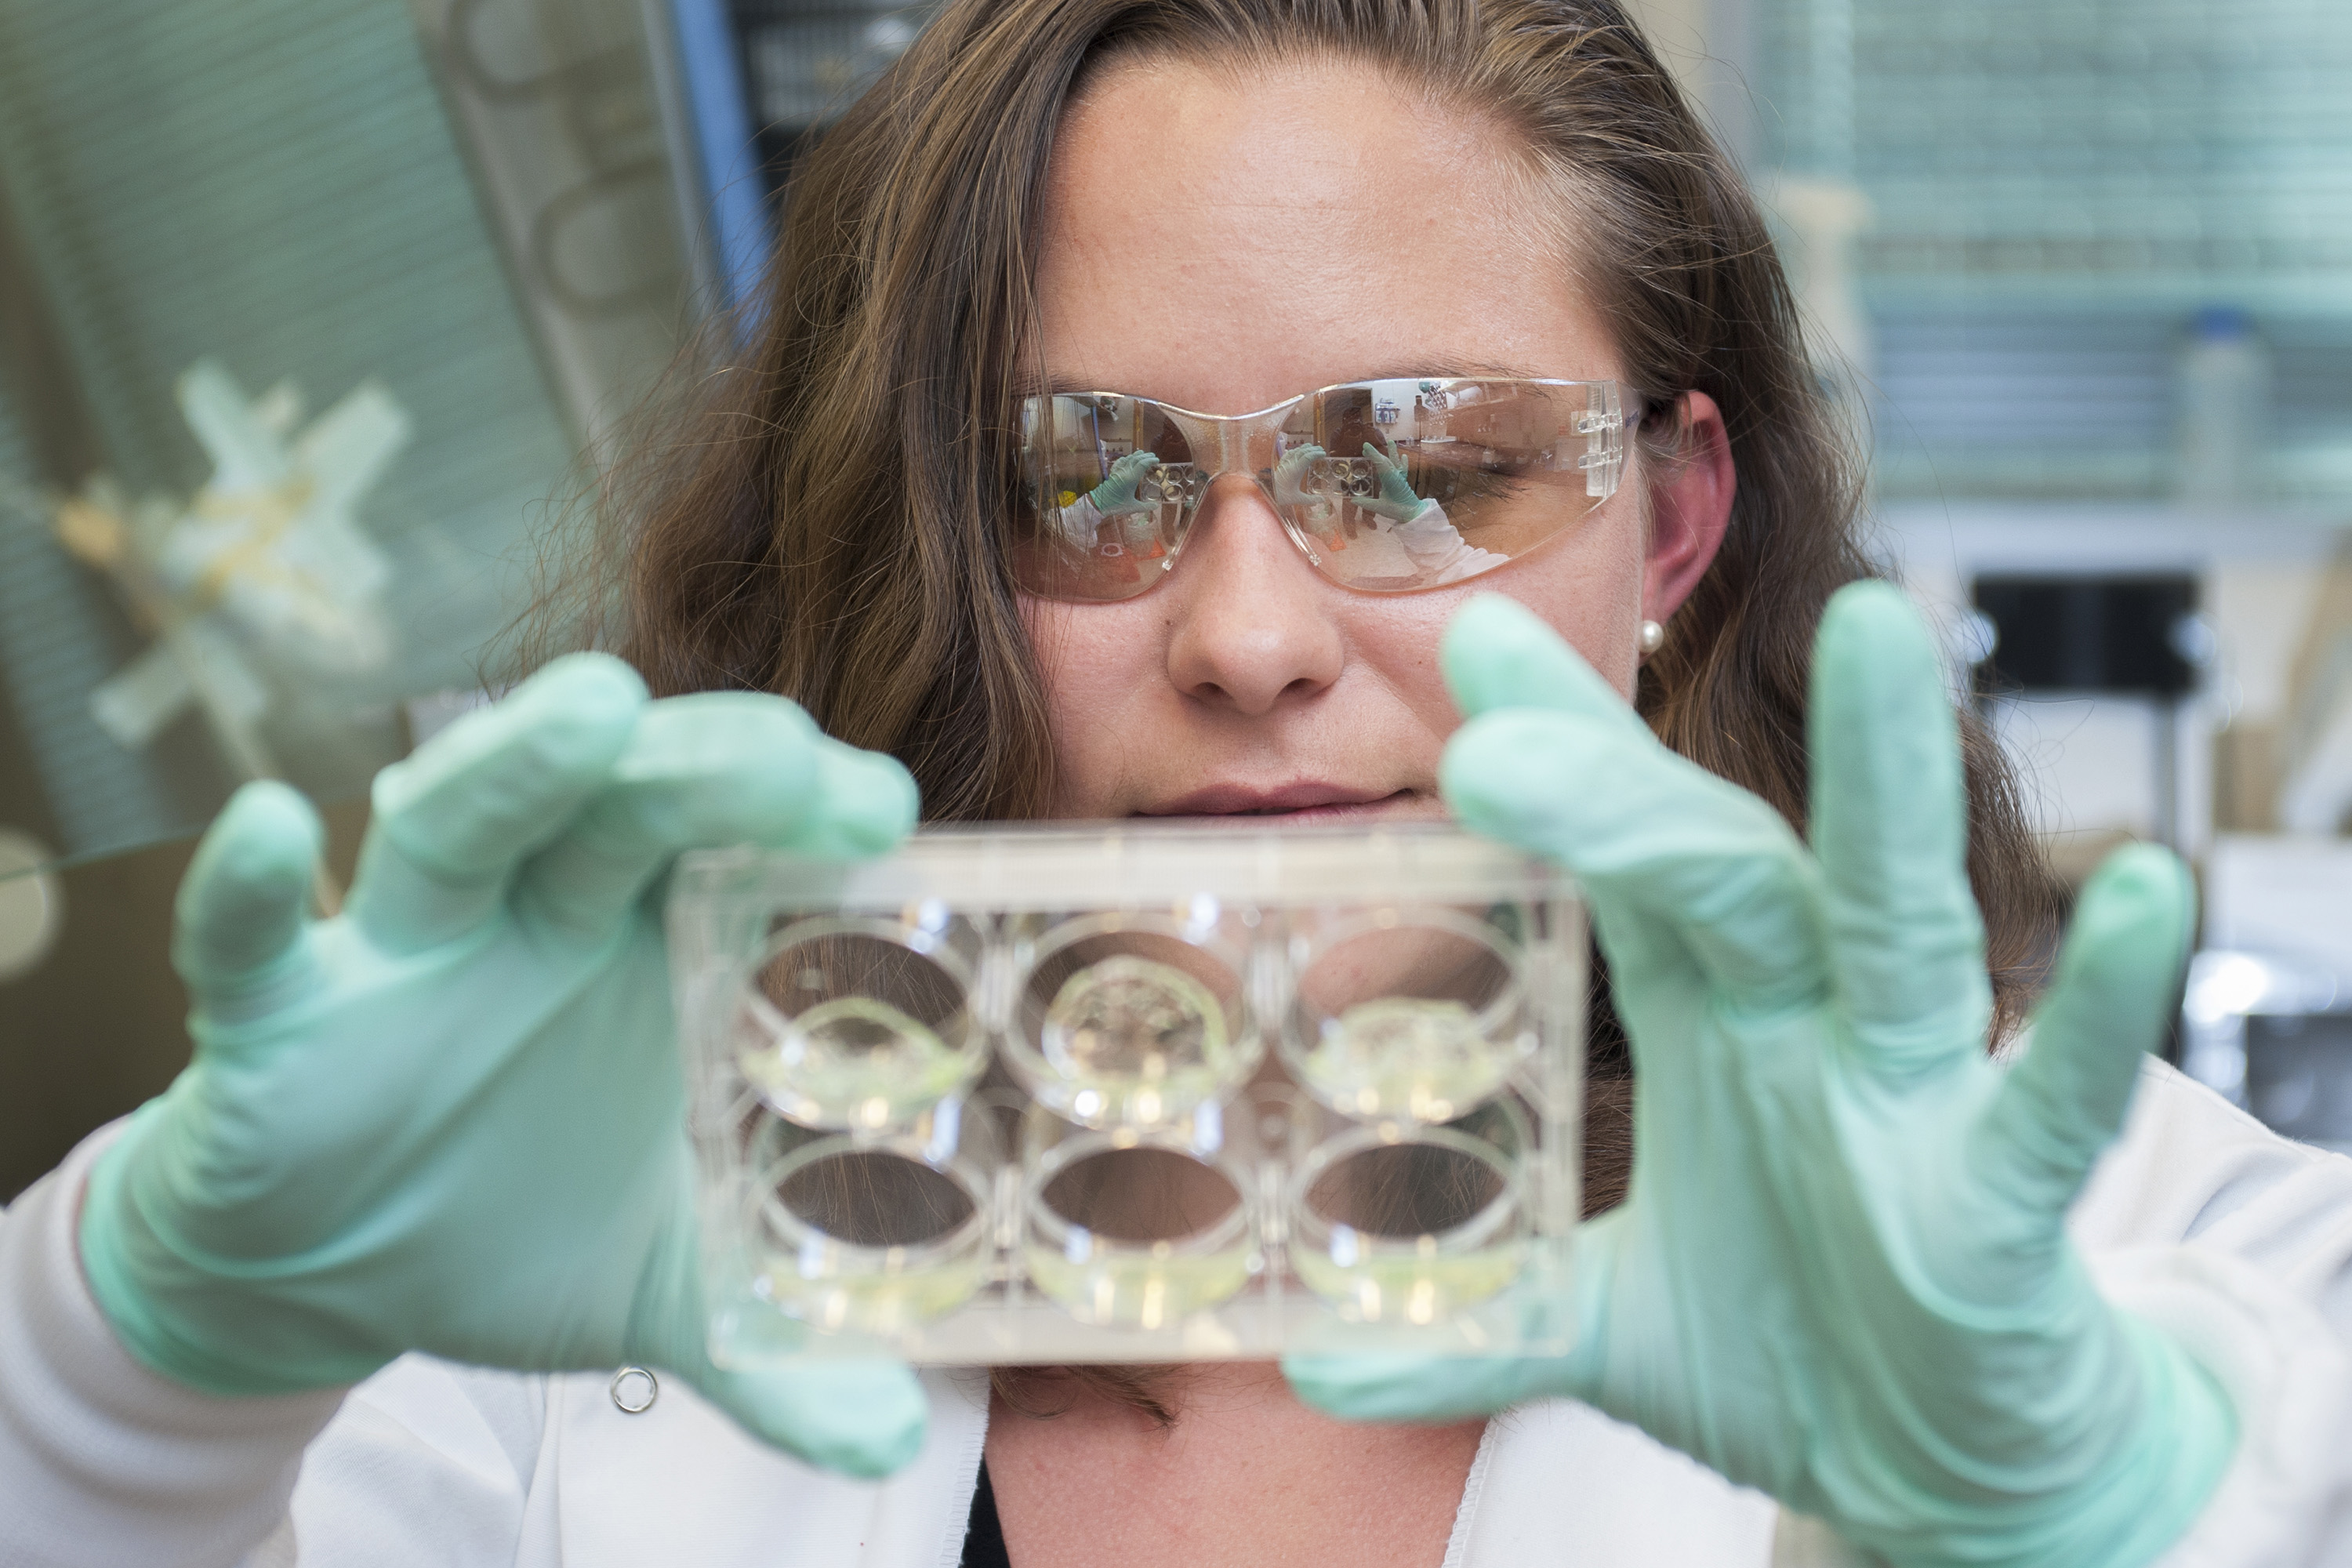 Jessica Weaver, a postdoctoral researcher in Georgia Tech’s Woodruff School of Mechanical Engineering, holds a multiwell plate containing hydrogels with pancreatic islet cells. (Credit: Christopher Moore, Georgia Tech)